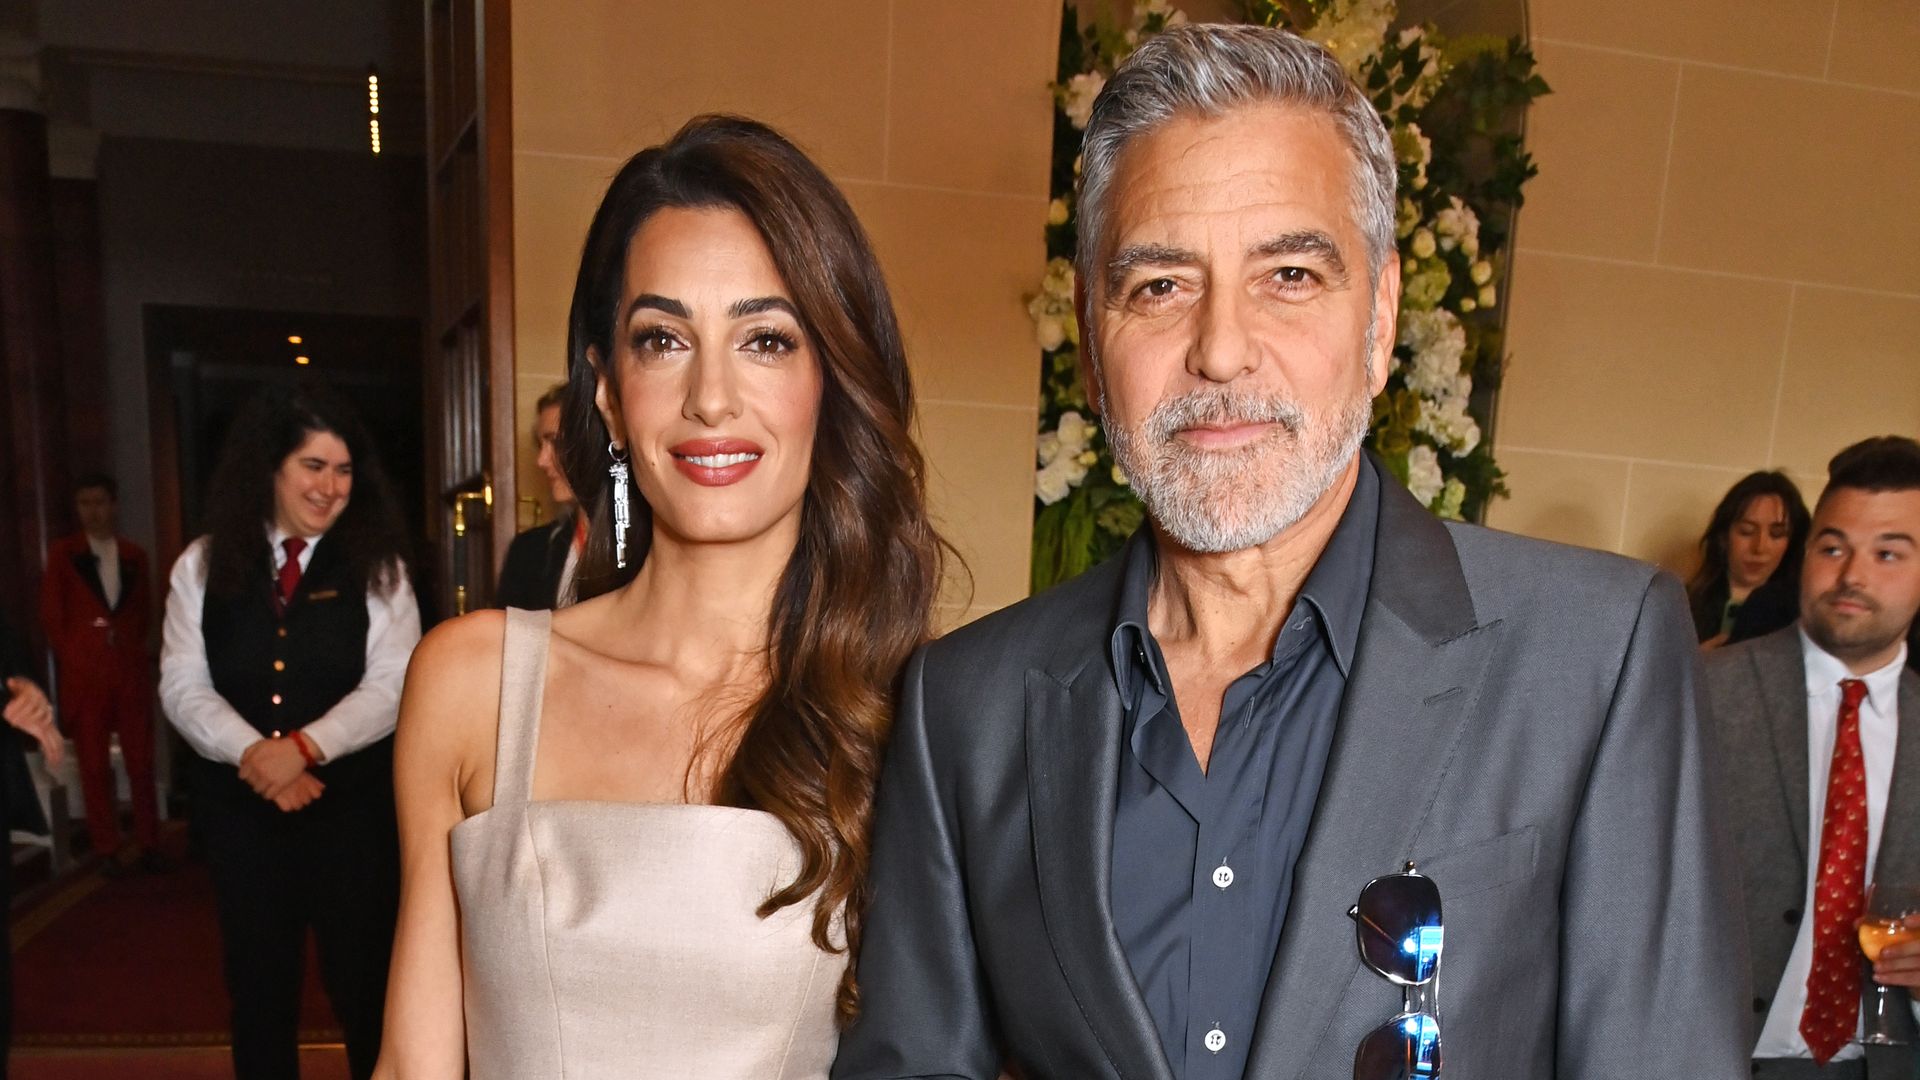 Amal Clooney stood with George Clooney